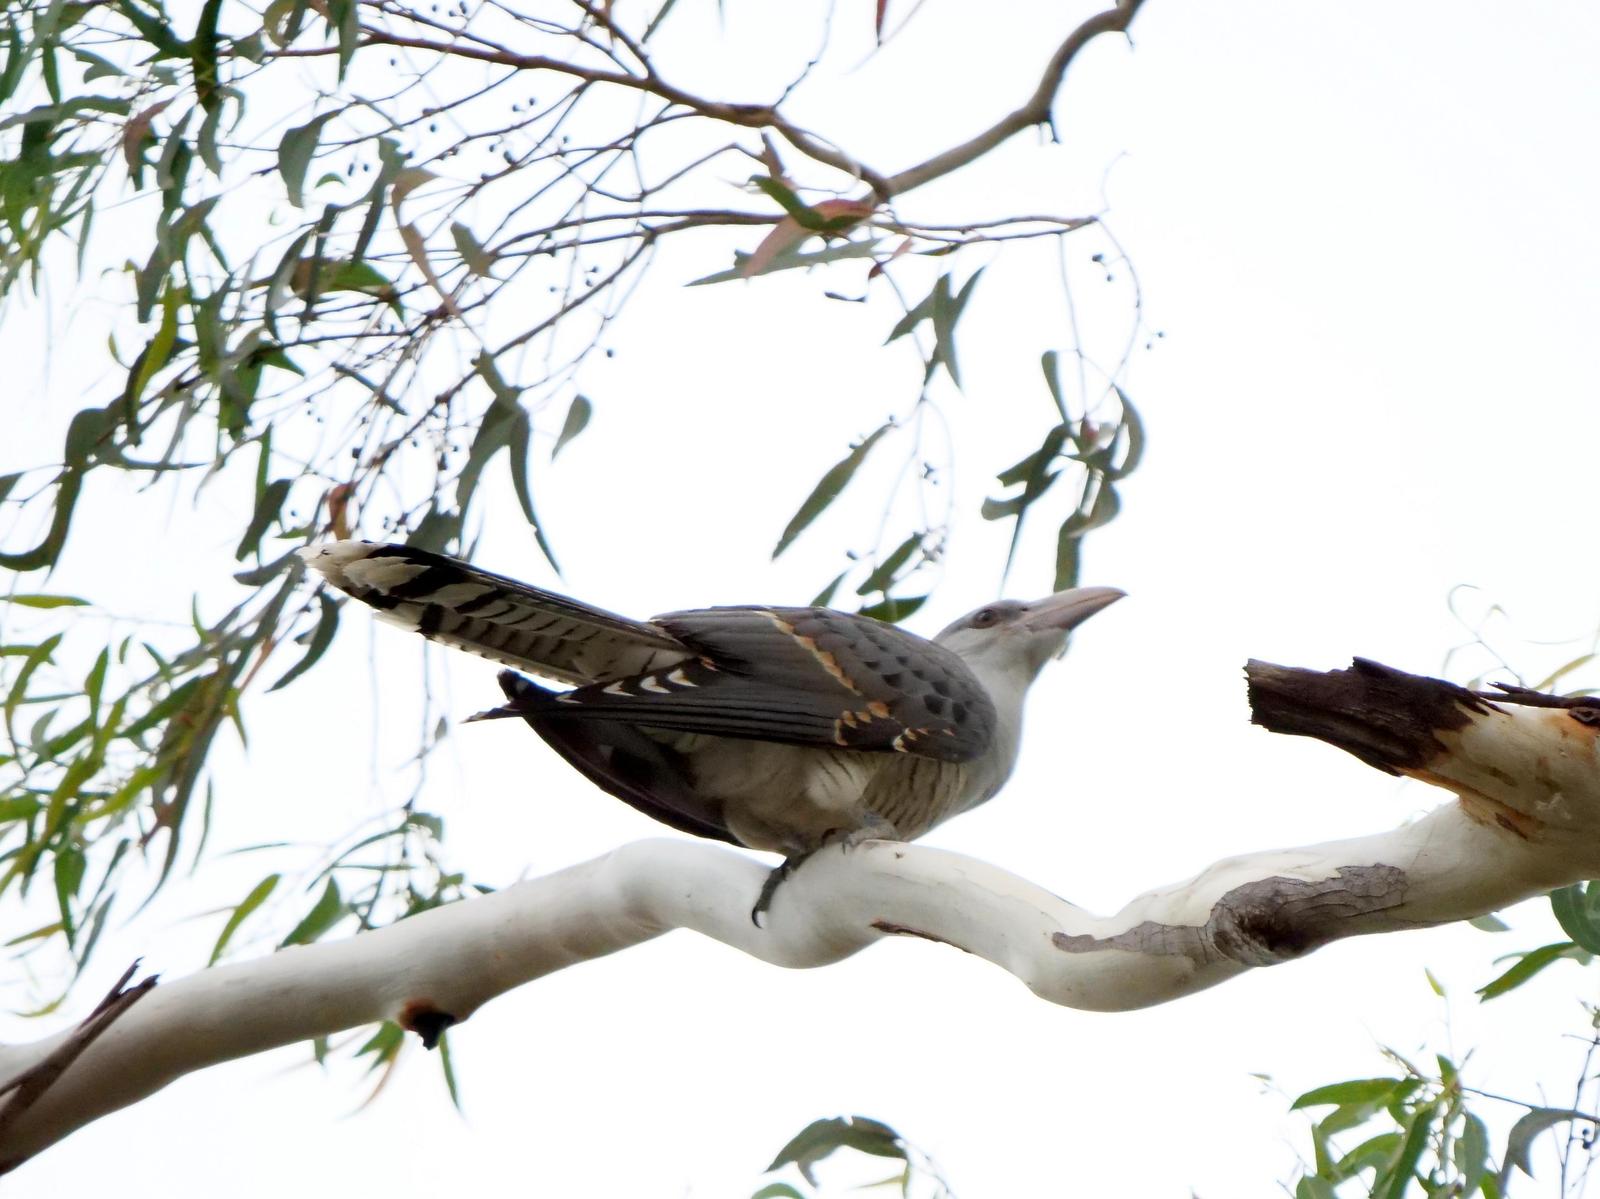 Channel-billed Cuckoo Photo by Peter Lowe